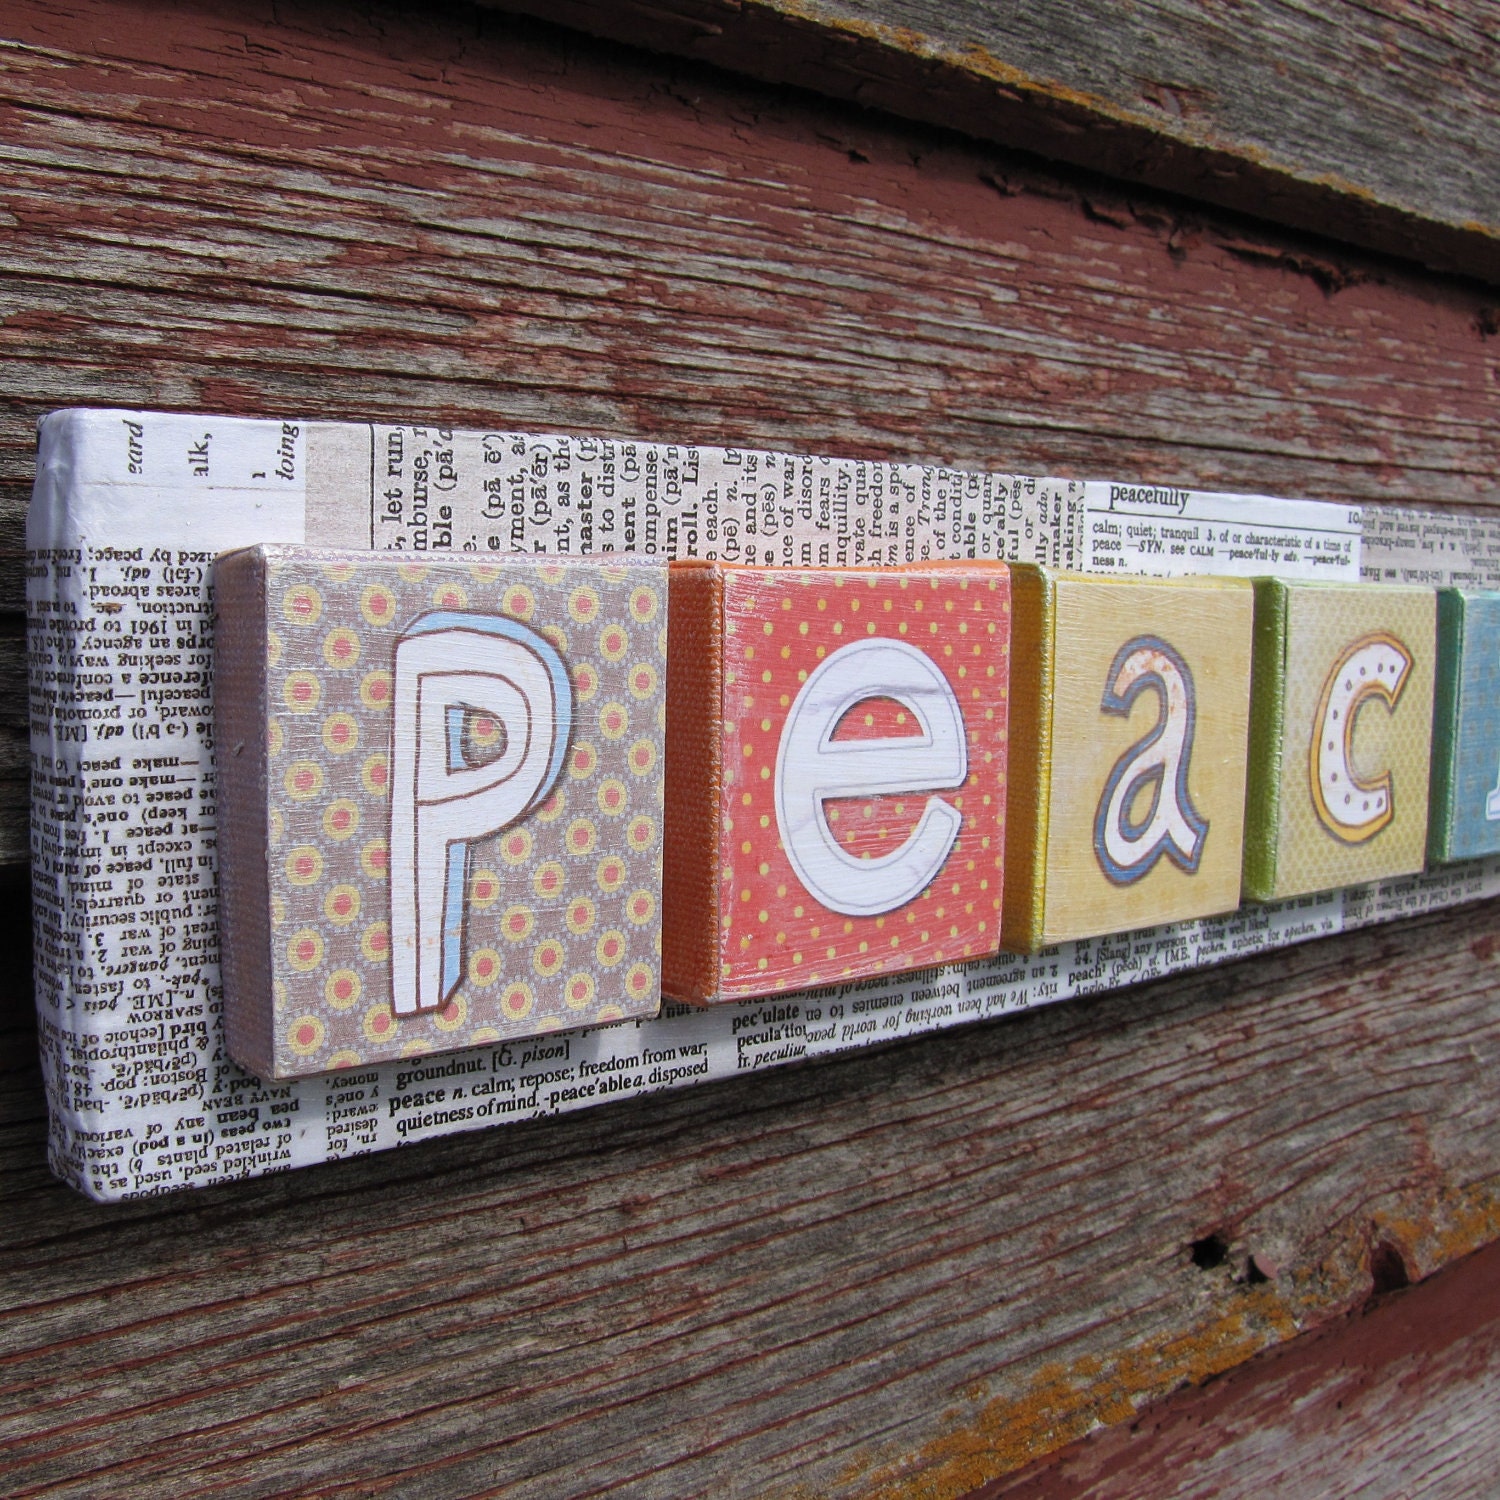 PEACE Mixed Media Collage Altered Art Strip - 3x17